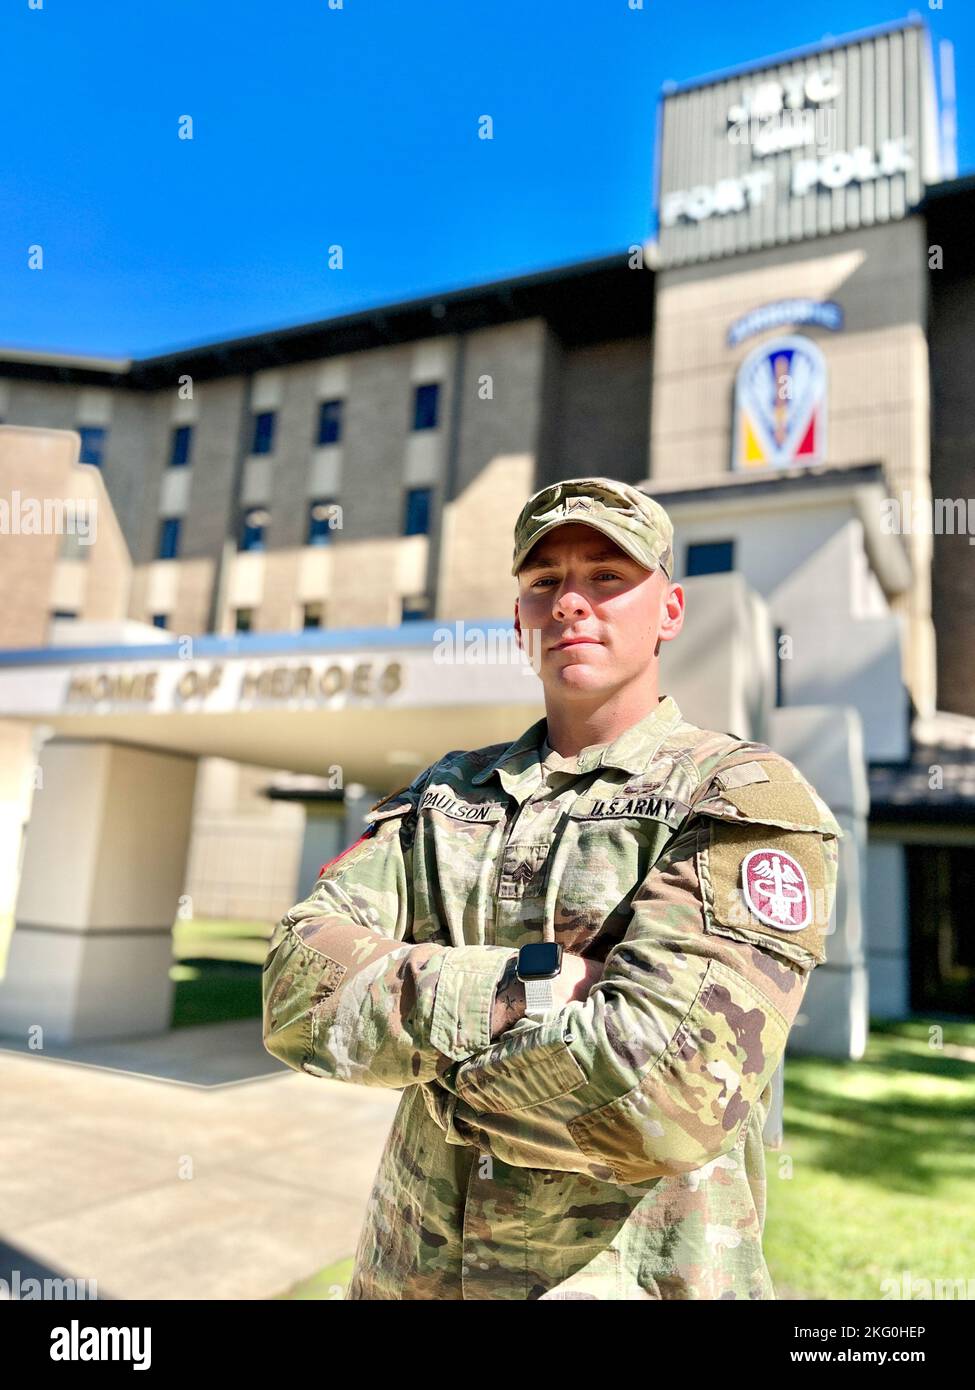 Sgt. Garrett Paulson, U.S. Army Noncommissioned Officer of the Year, is a combat medic assigned to Bayne-Jones Army Community Hospital at the Joint Readiness Training Center and Fort Polk, Louisiana. Stock Photo